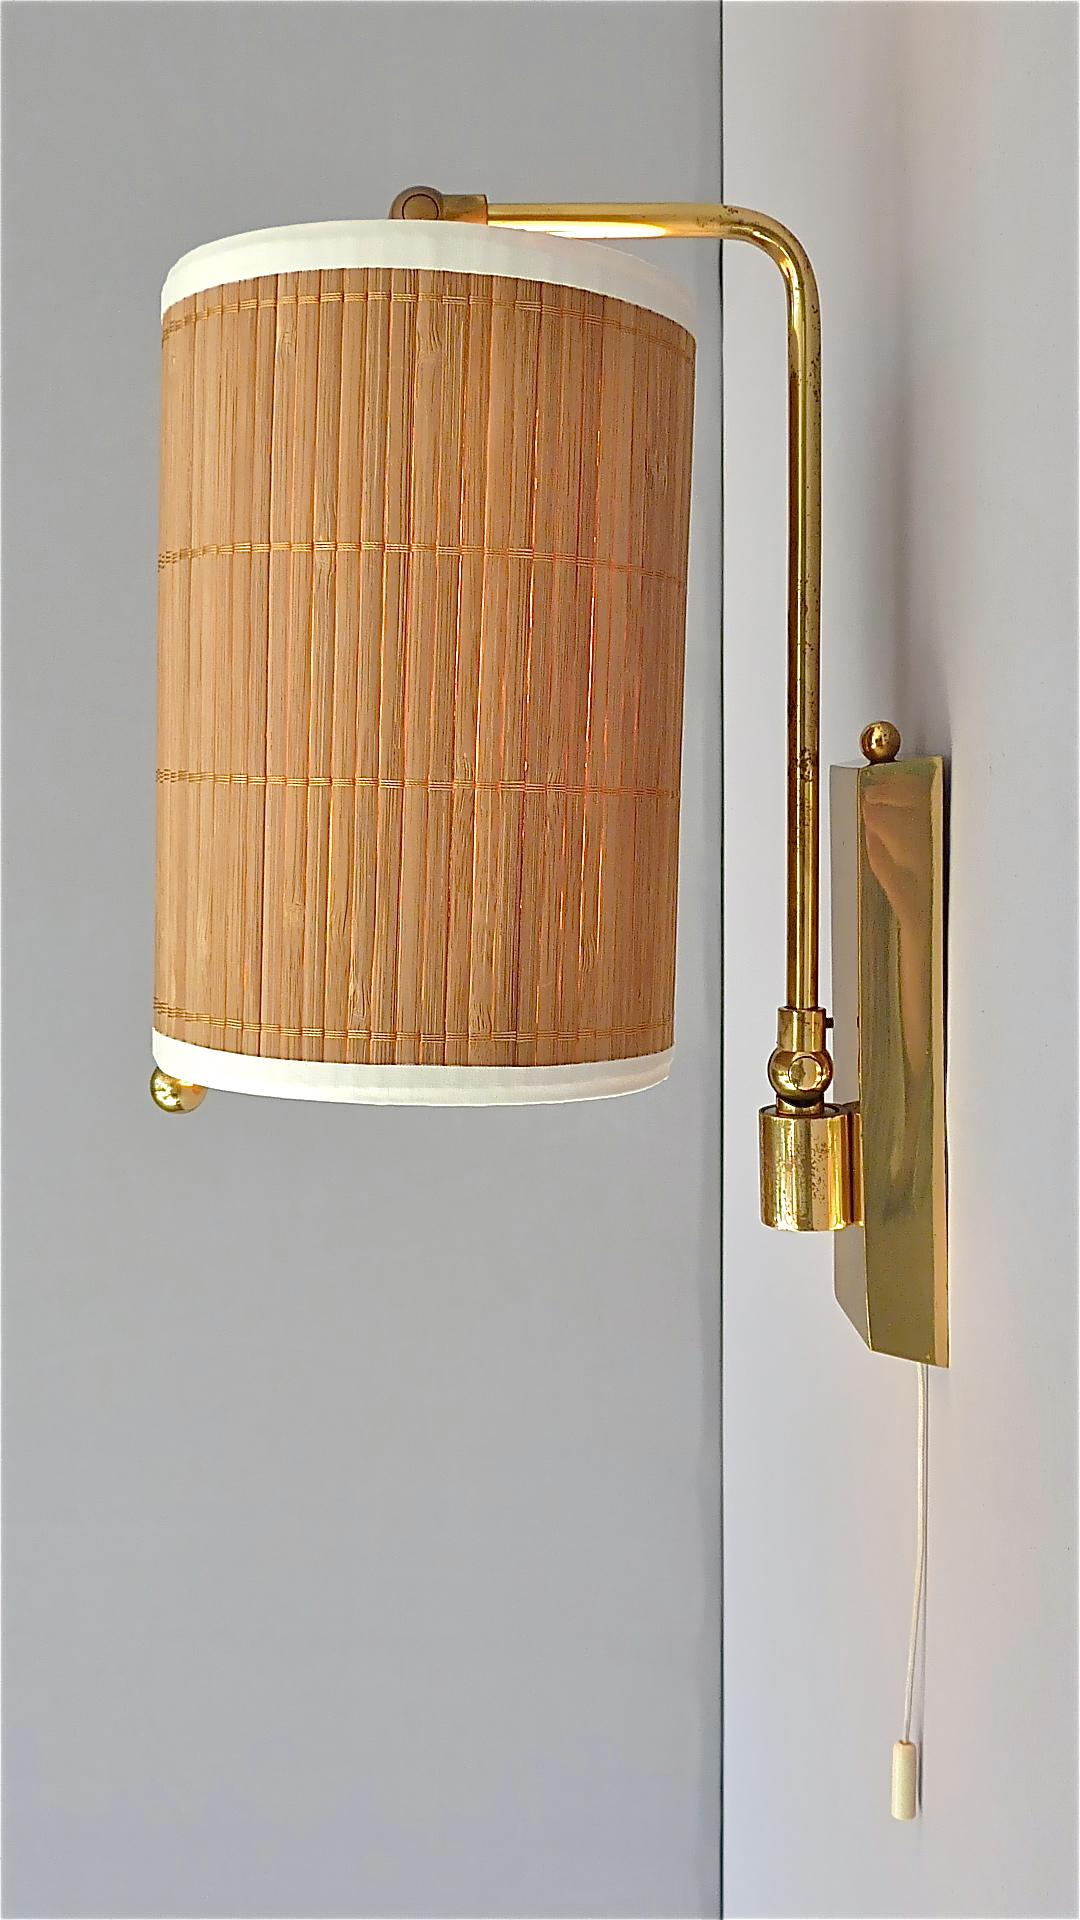 Wall Lamp Paavo Tynell Taito Oy Kalmar Style Brass Cane Wood Shade 1950s Sconce For Sale 5